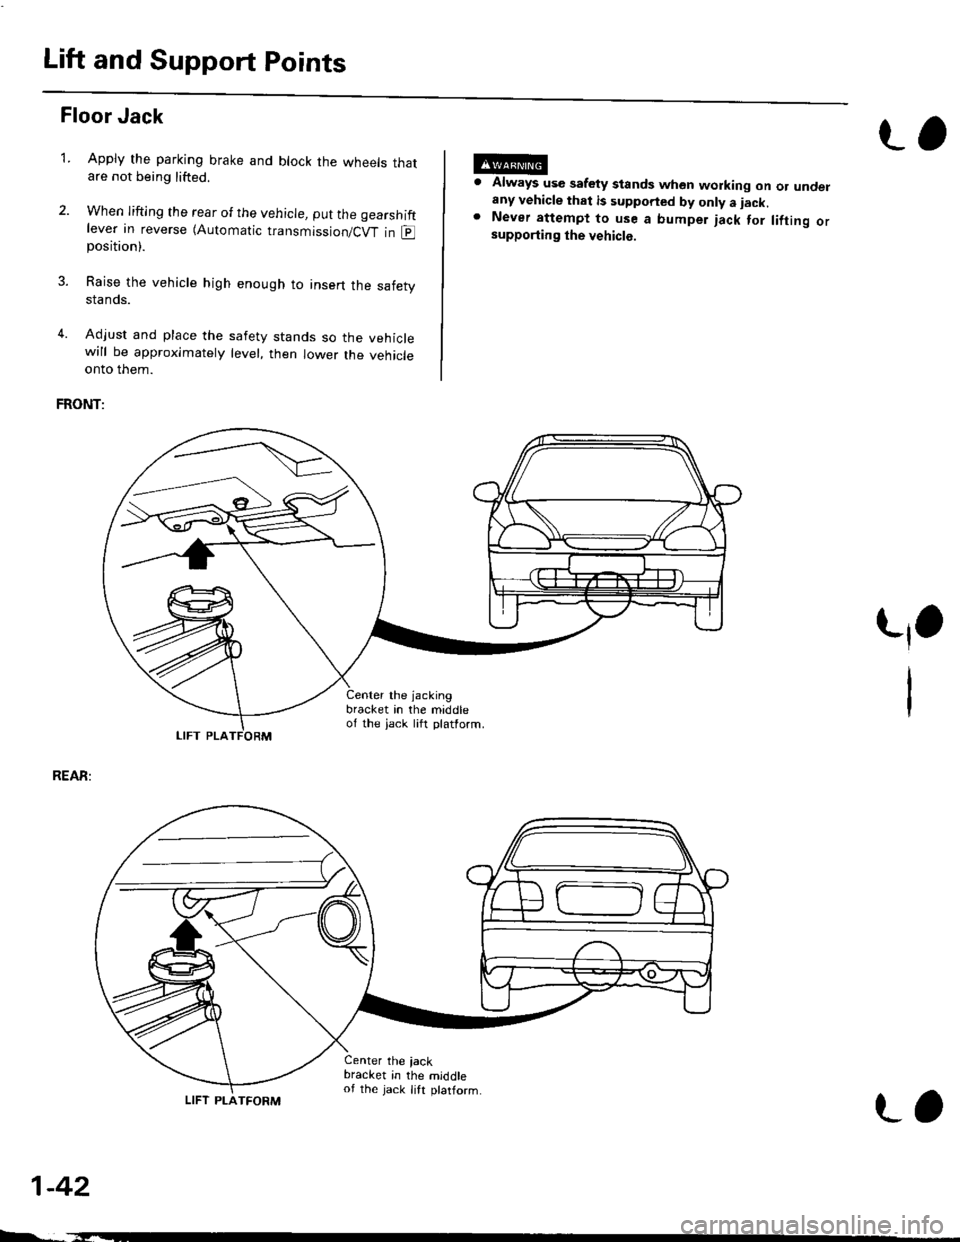 HONDA CIVIC 1997 6.G Service Manual Lift and Support Points
Floor Jack
Apply the parking brake and block the wheets thatare not being lifted.
When lifting the rear of the vehicle, put the gearshiftlever in reverse (Automatic transmissio